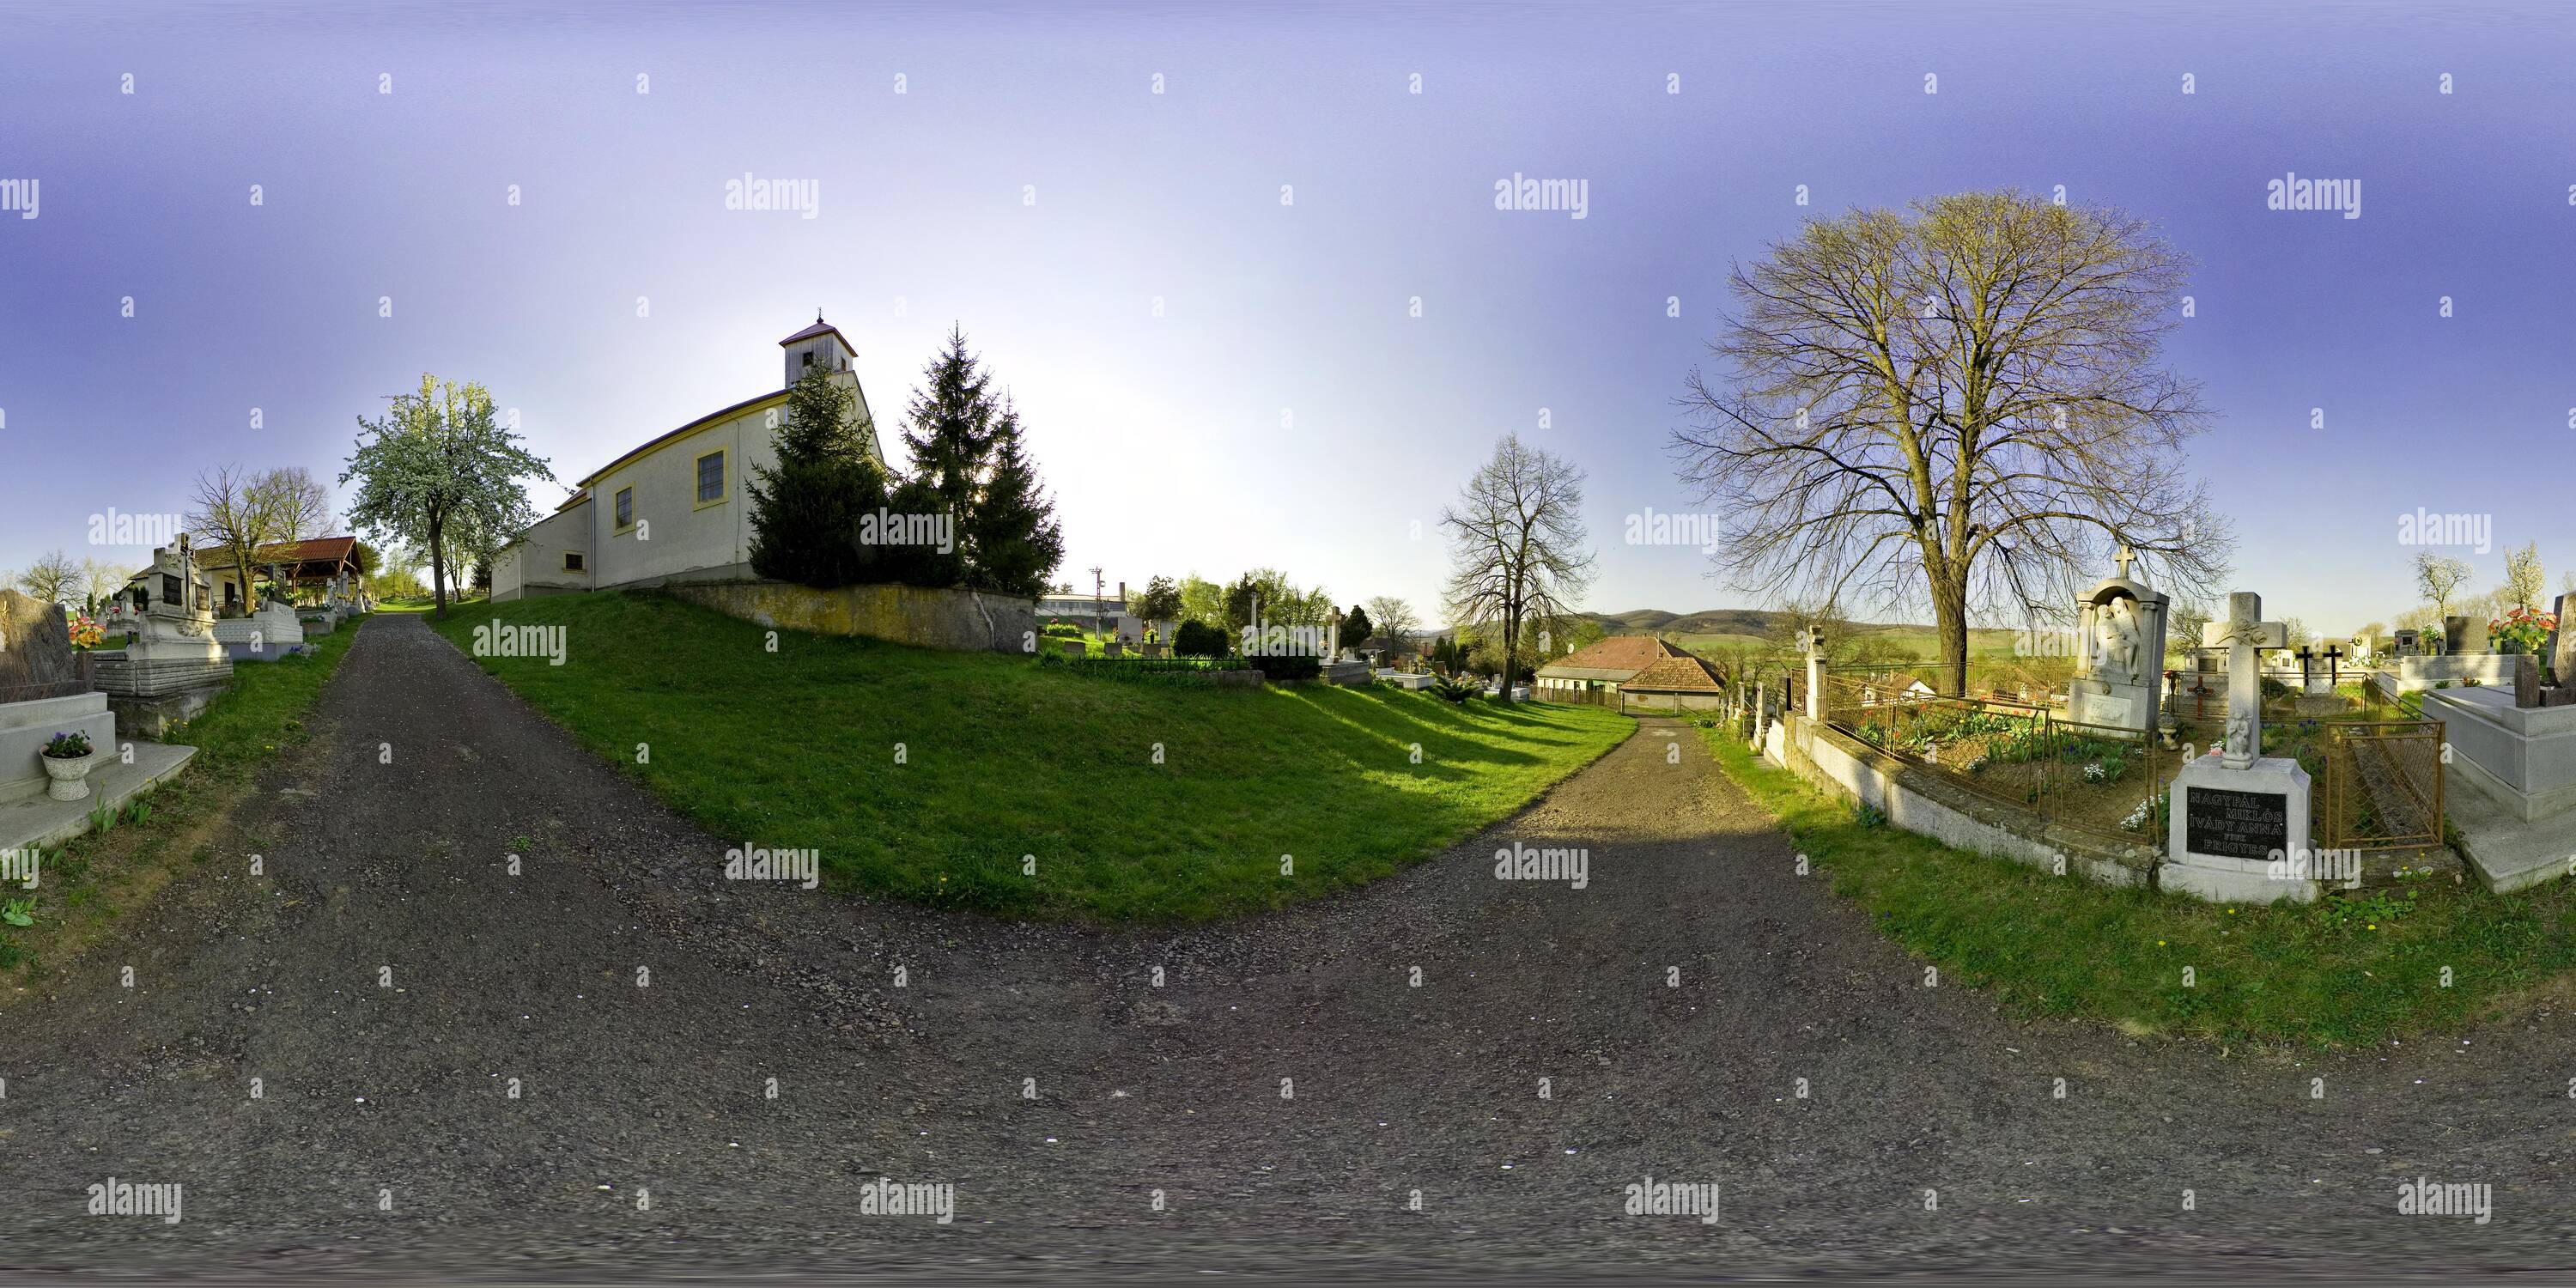 360 degree panoramic view of Cemetery and church